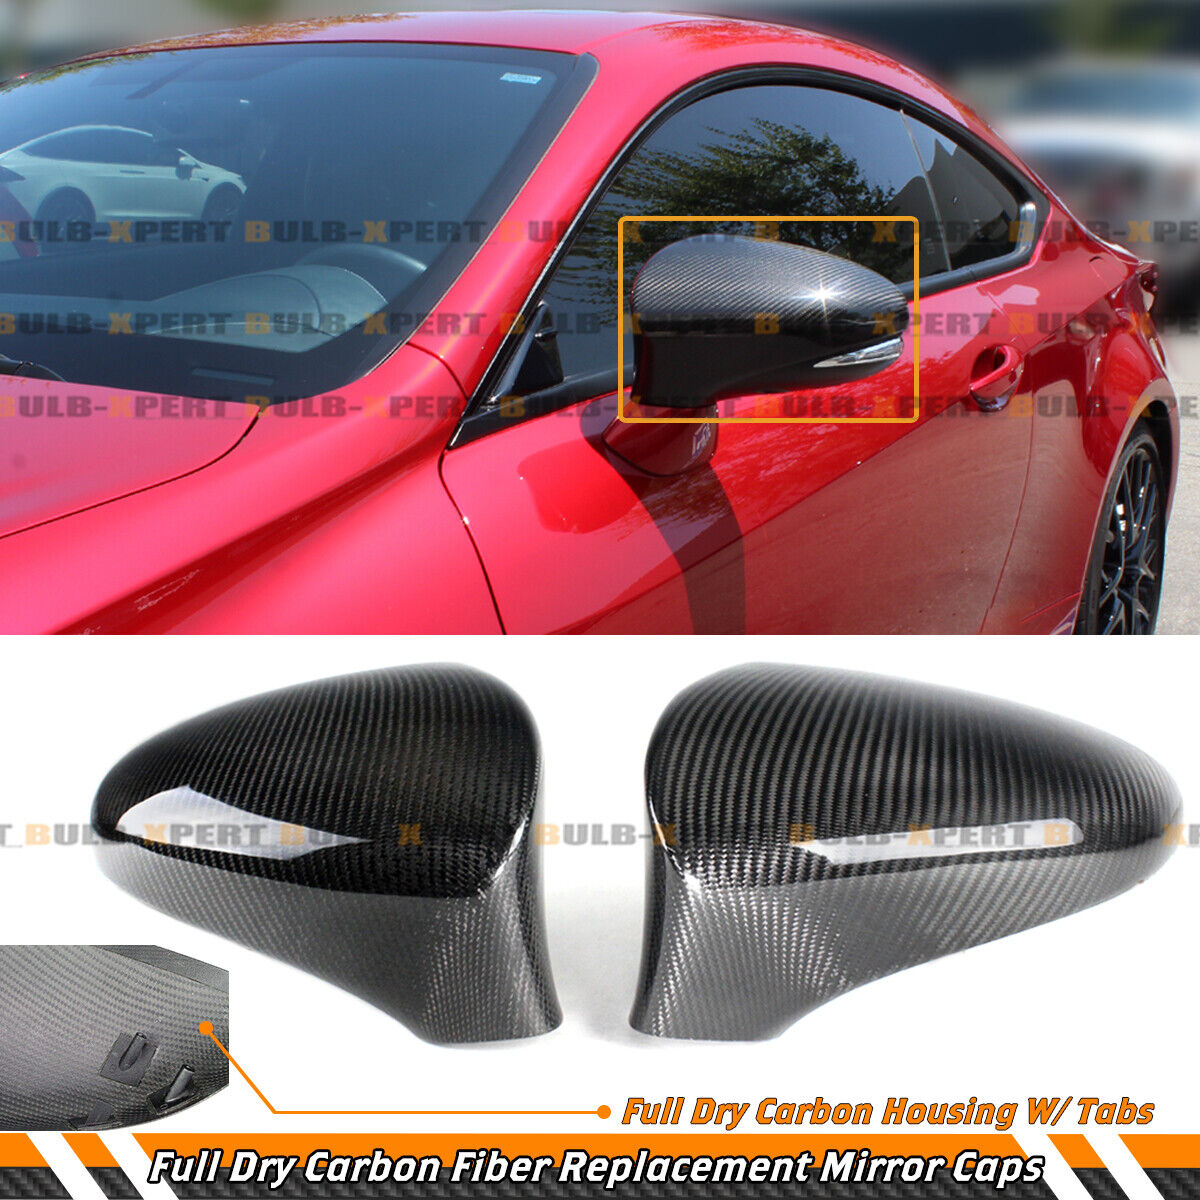 FULL DRY CARBON FIBER SIDE MIRROR REPLACEMENT COVER FOR 13-17 LEXUS RC/ES/IS/GS